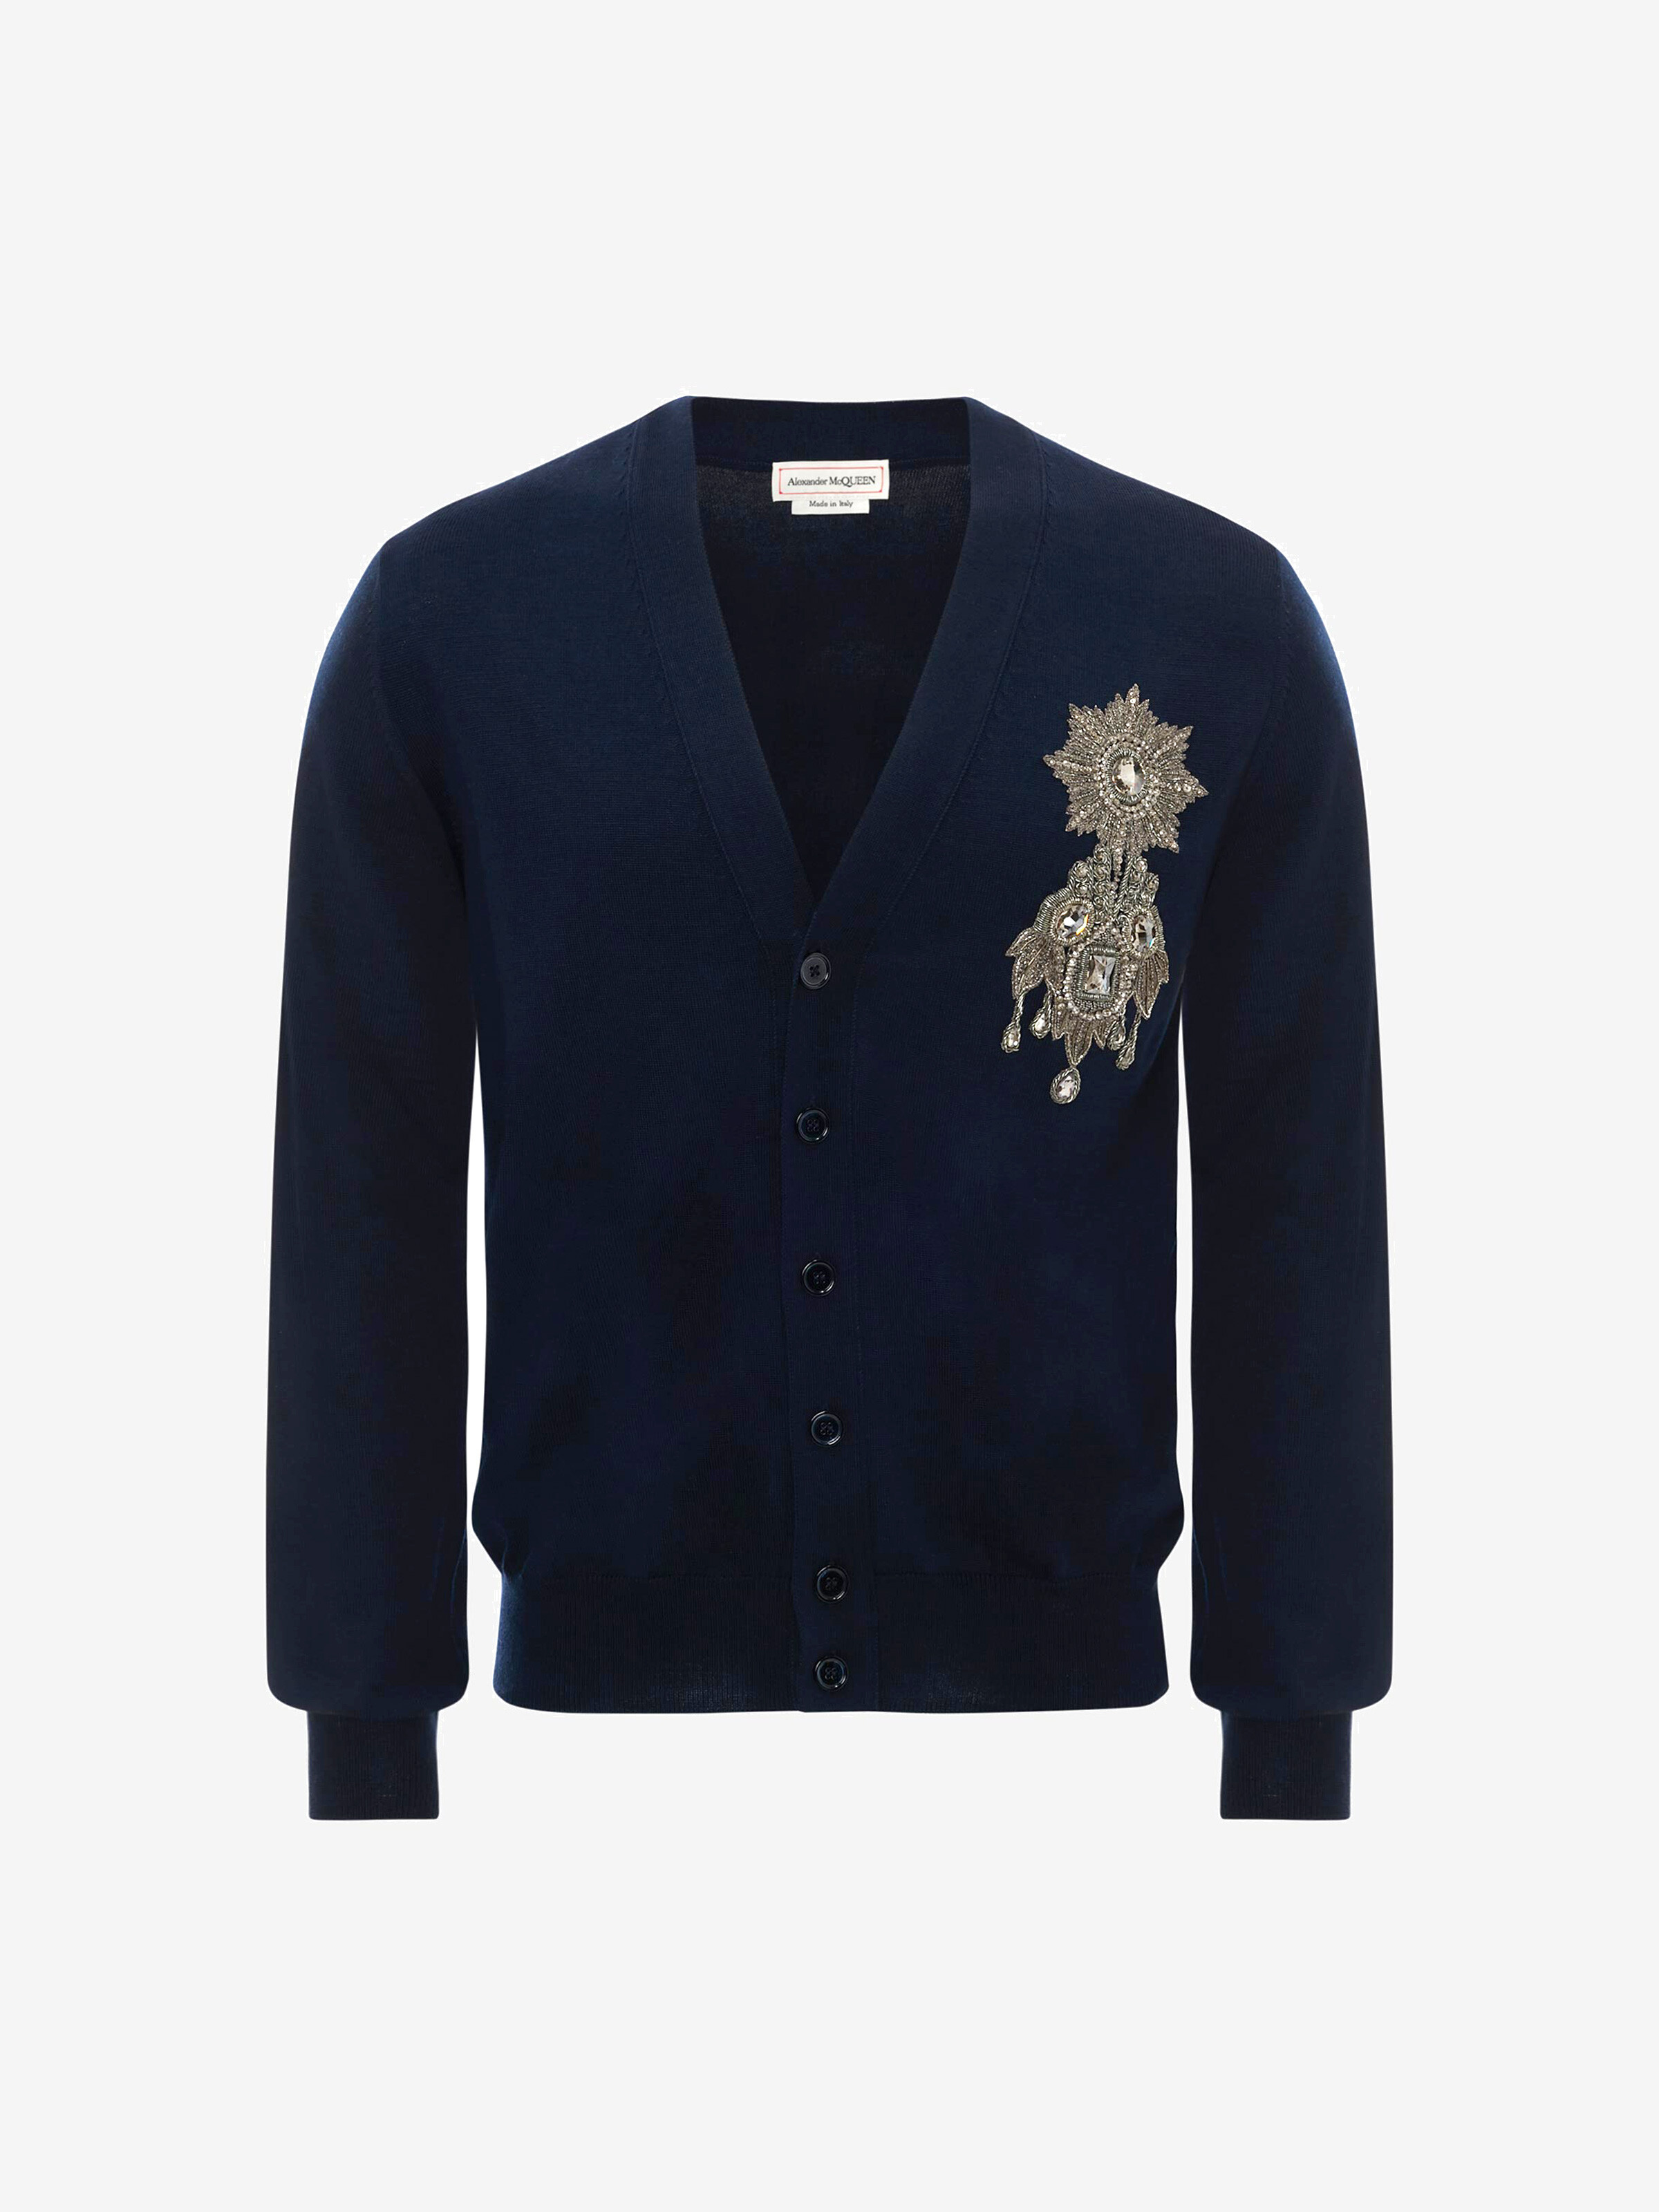 ALEXANDER MCQUEEN MILITARY BADGE EMBROIDERED CARDIGAN